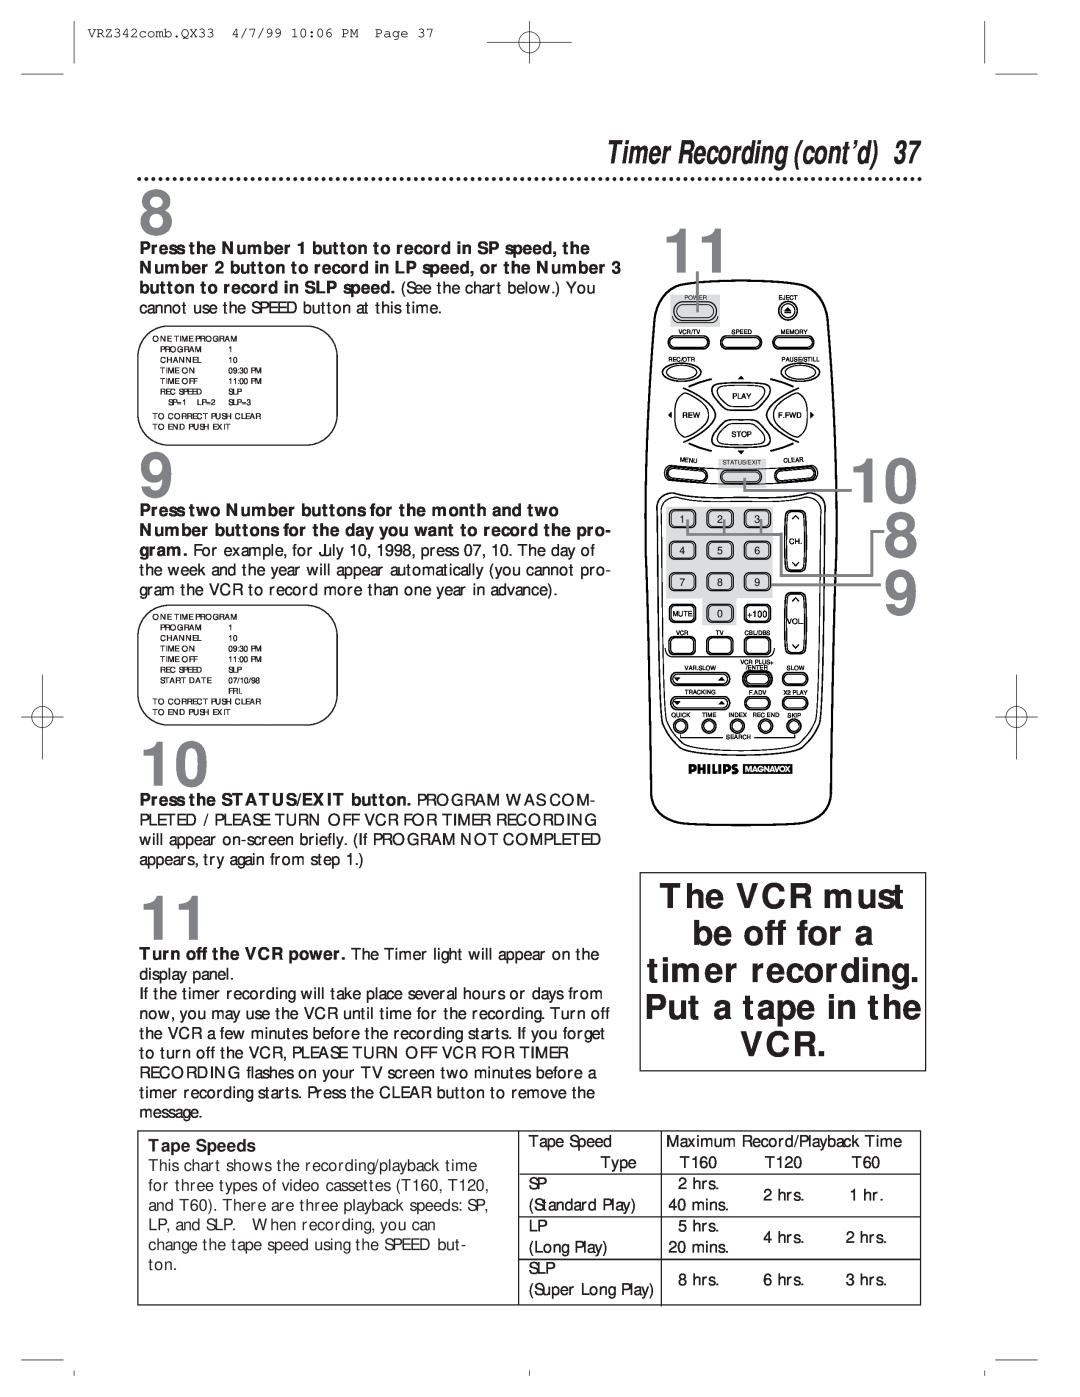 Magnavox VRZ342AT99 owner manual Timer Recording cont’d, The VCR must be off for a, timer recording. Put a tape in the VCR 